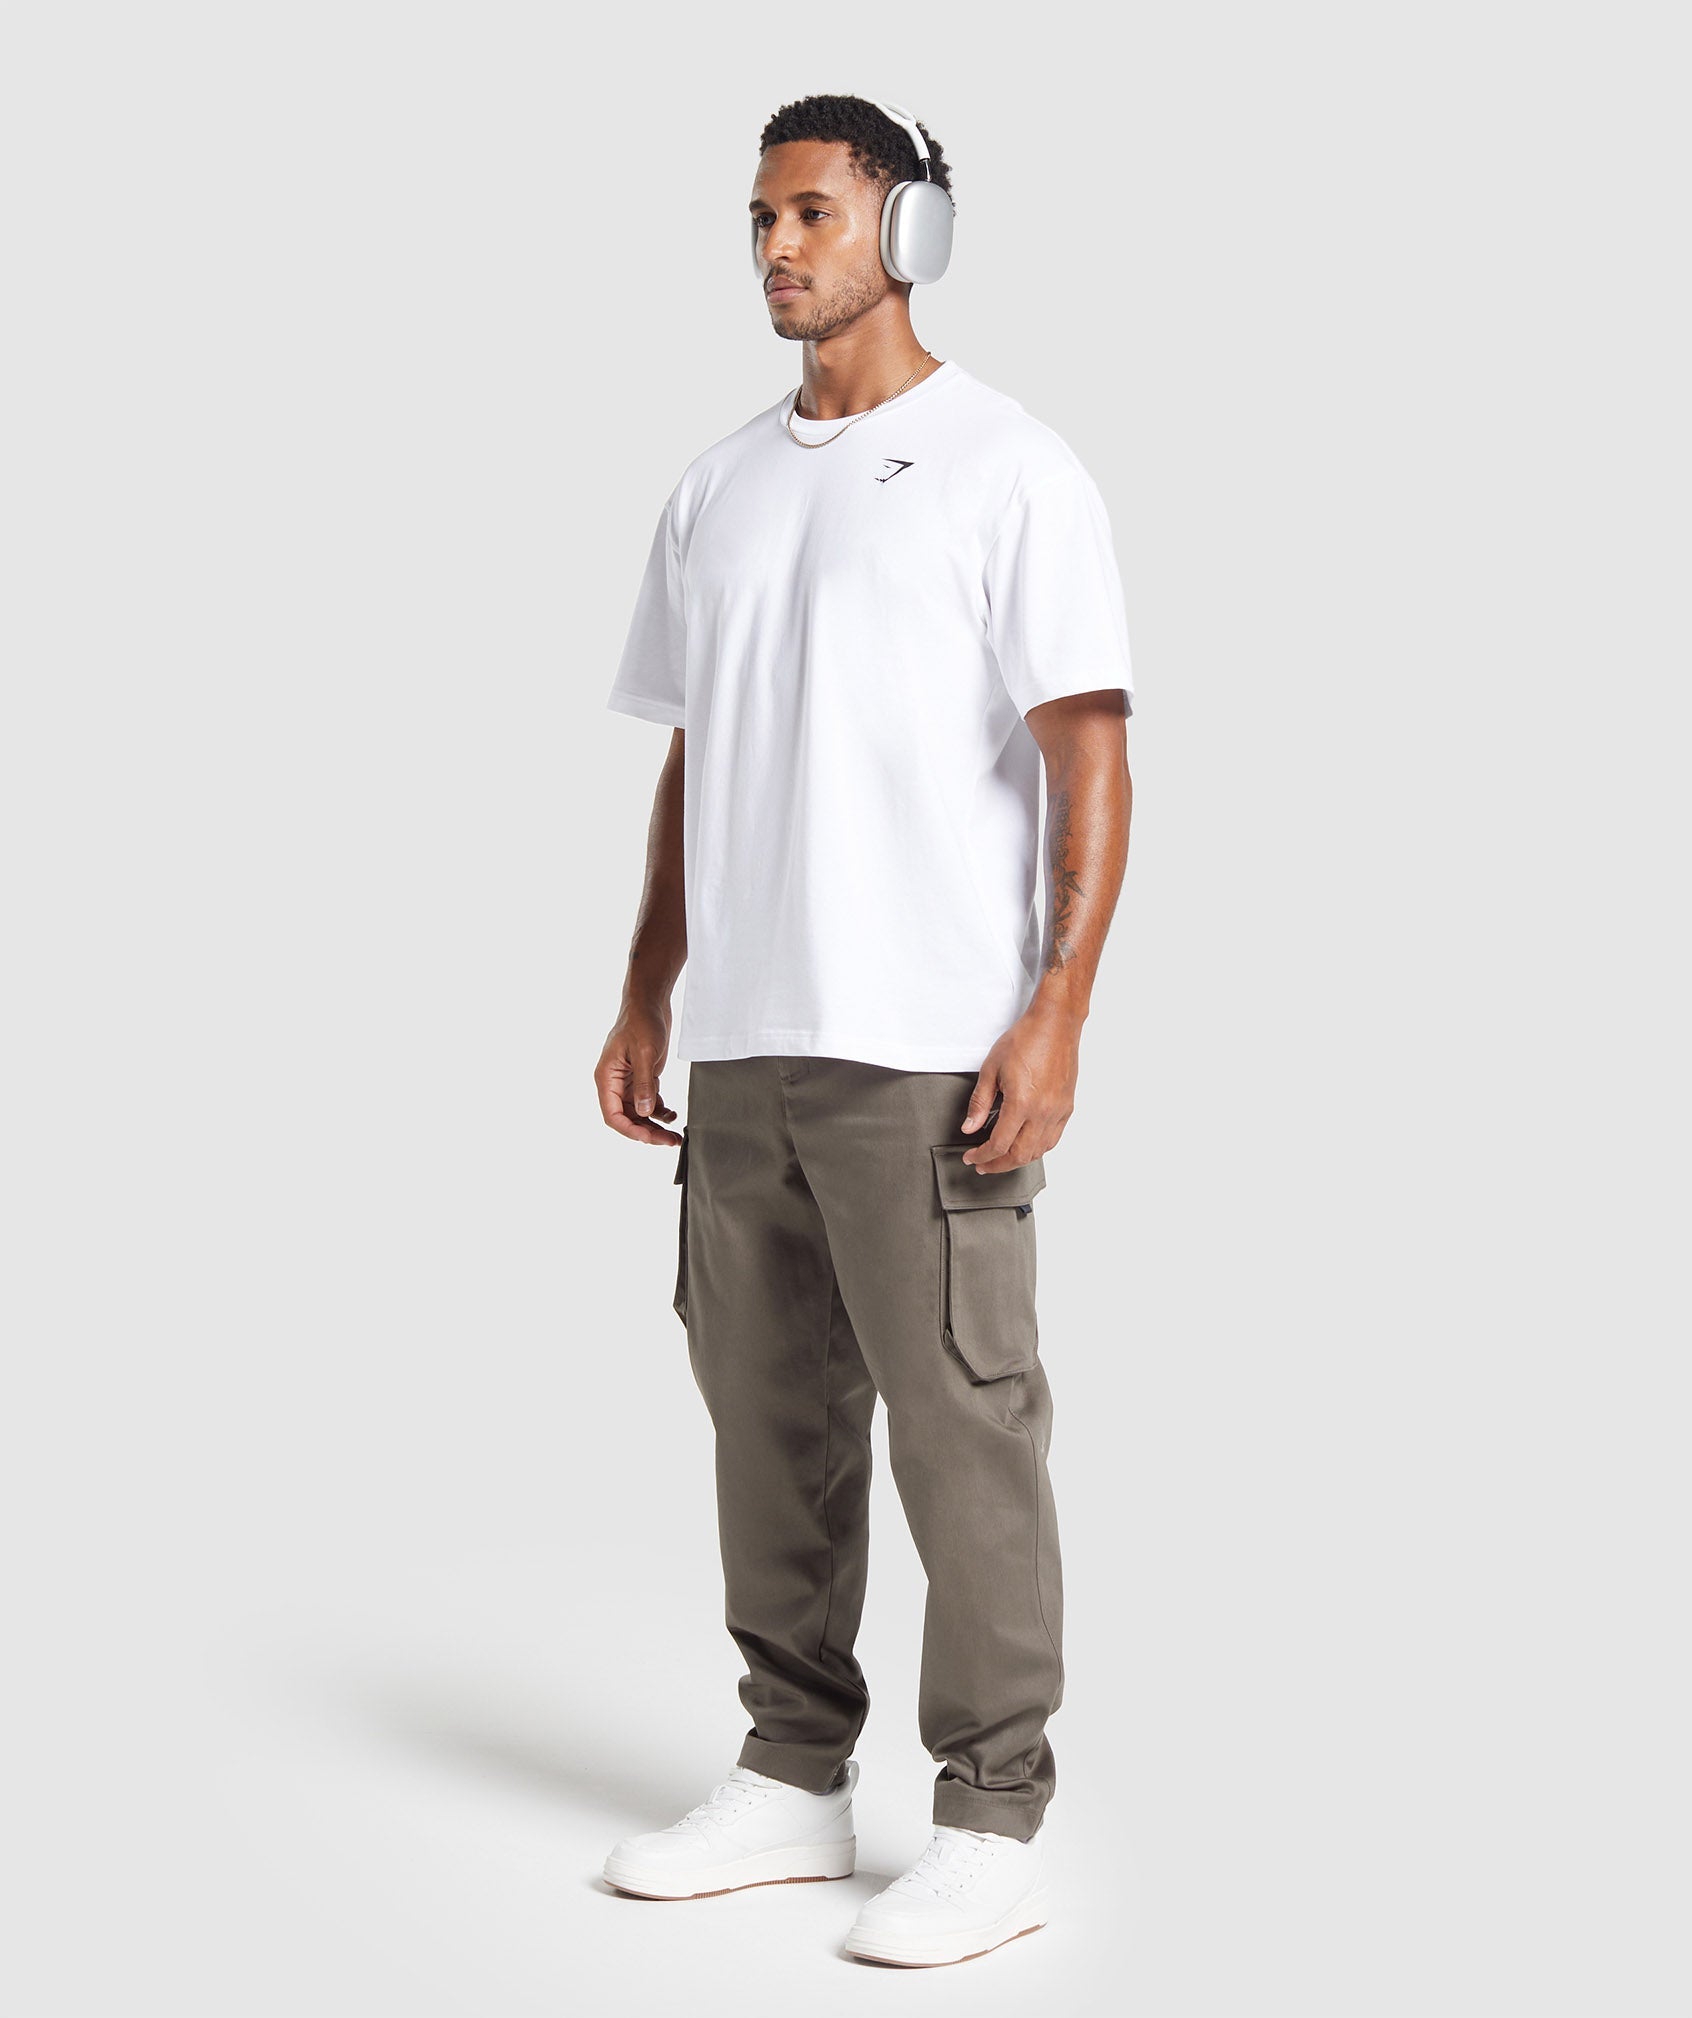 Rest Day Woven Cargo Pants in Camo Brown - view 4